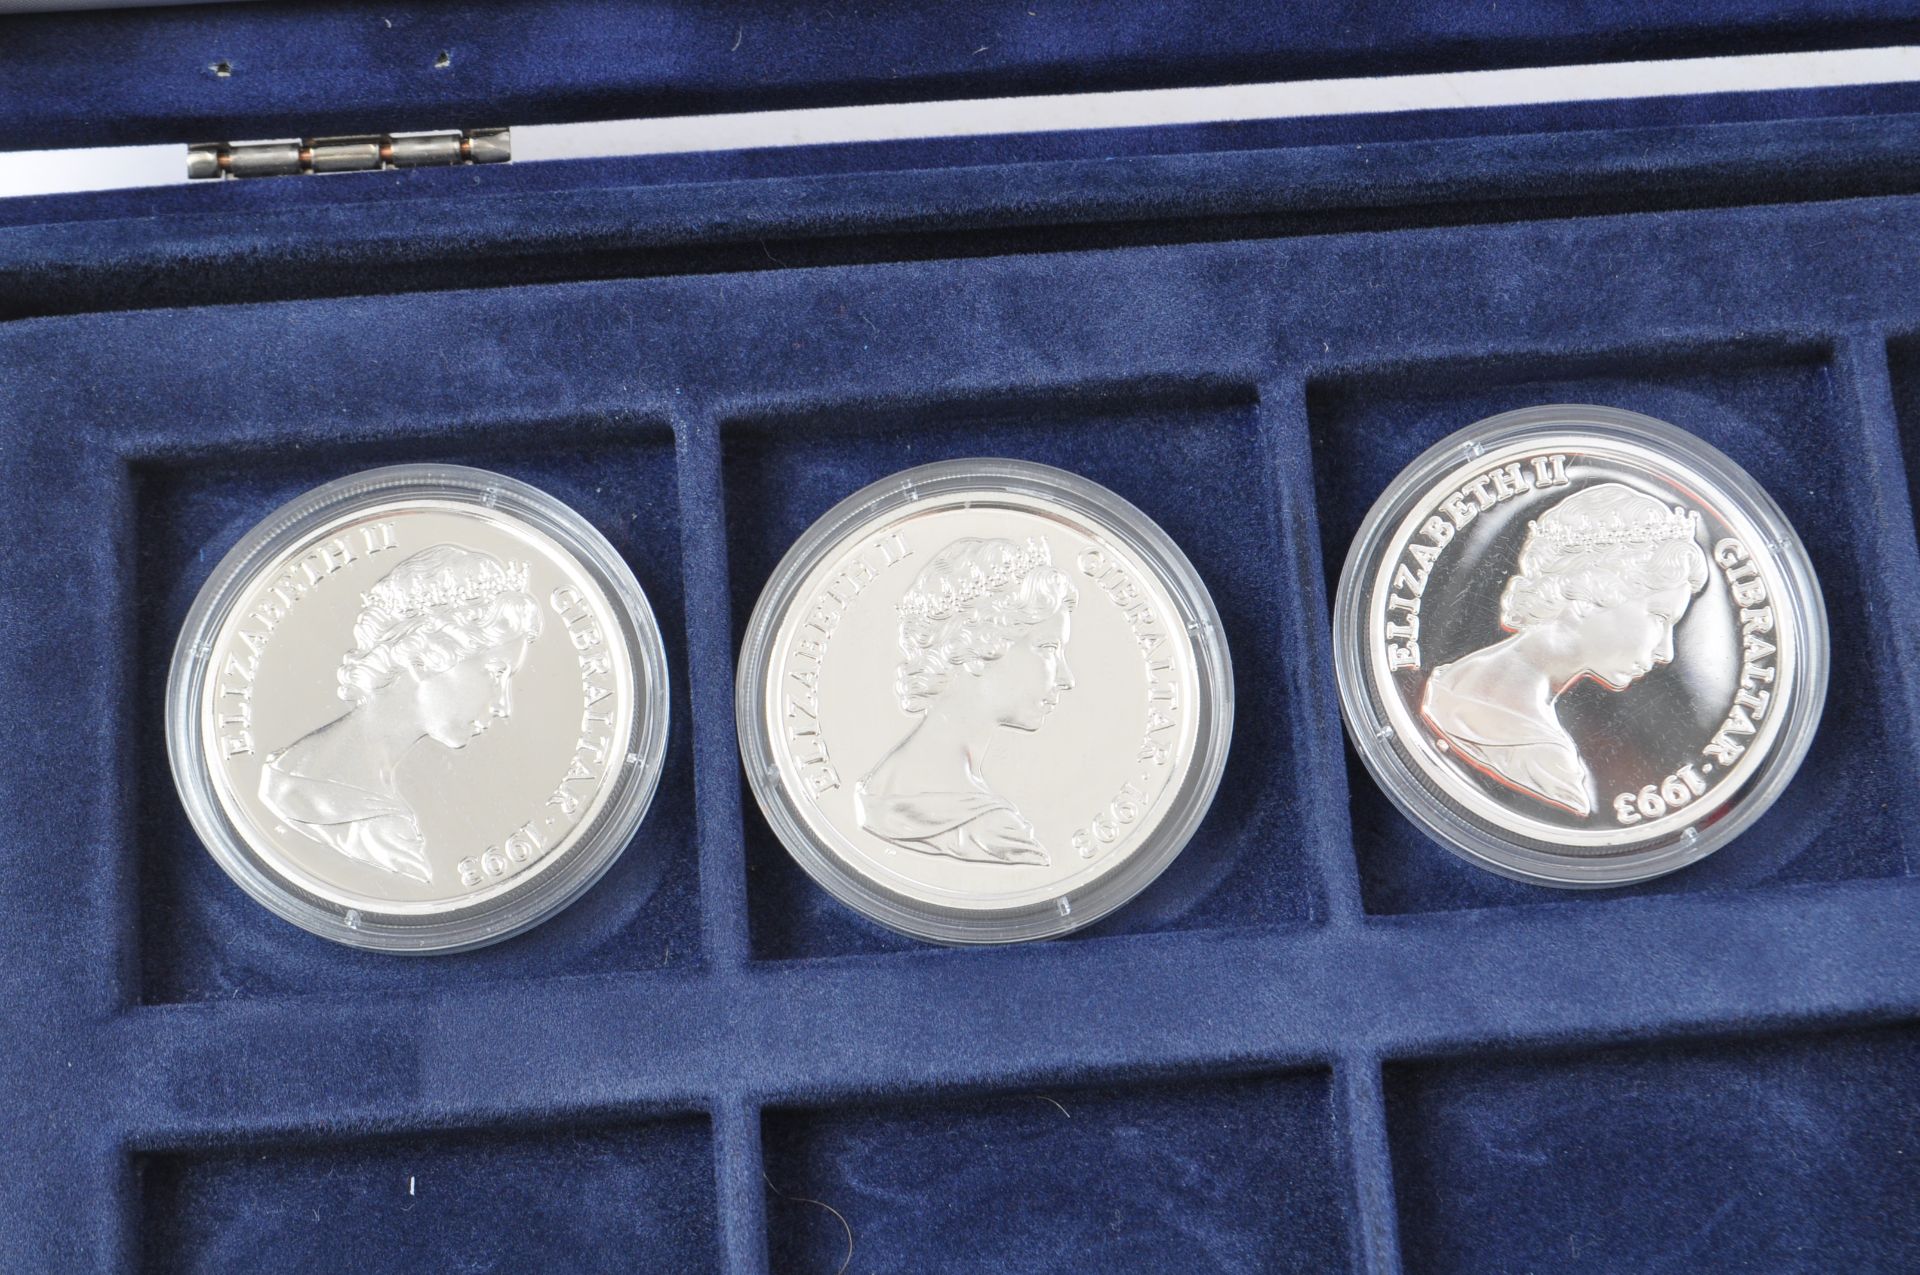 WESTMINSTER MINT - SILVER PROOF COIN COLLECTION - Image 5 of 7